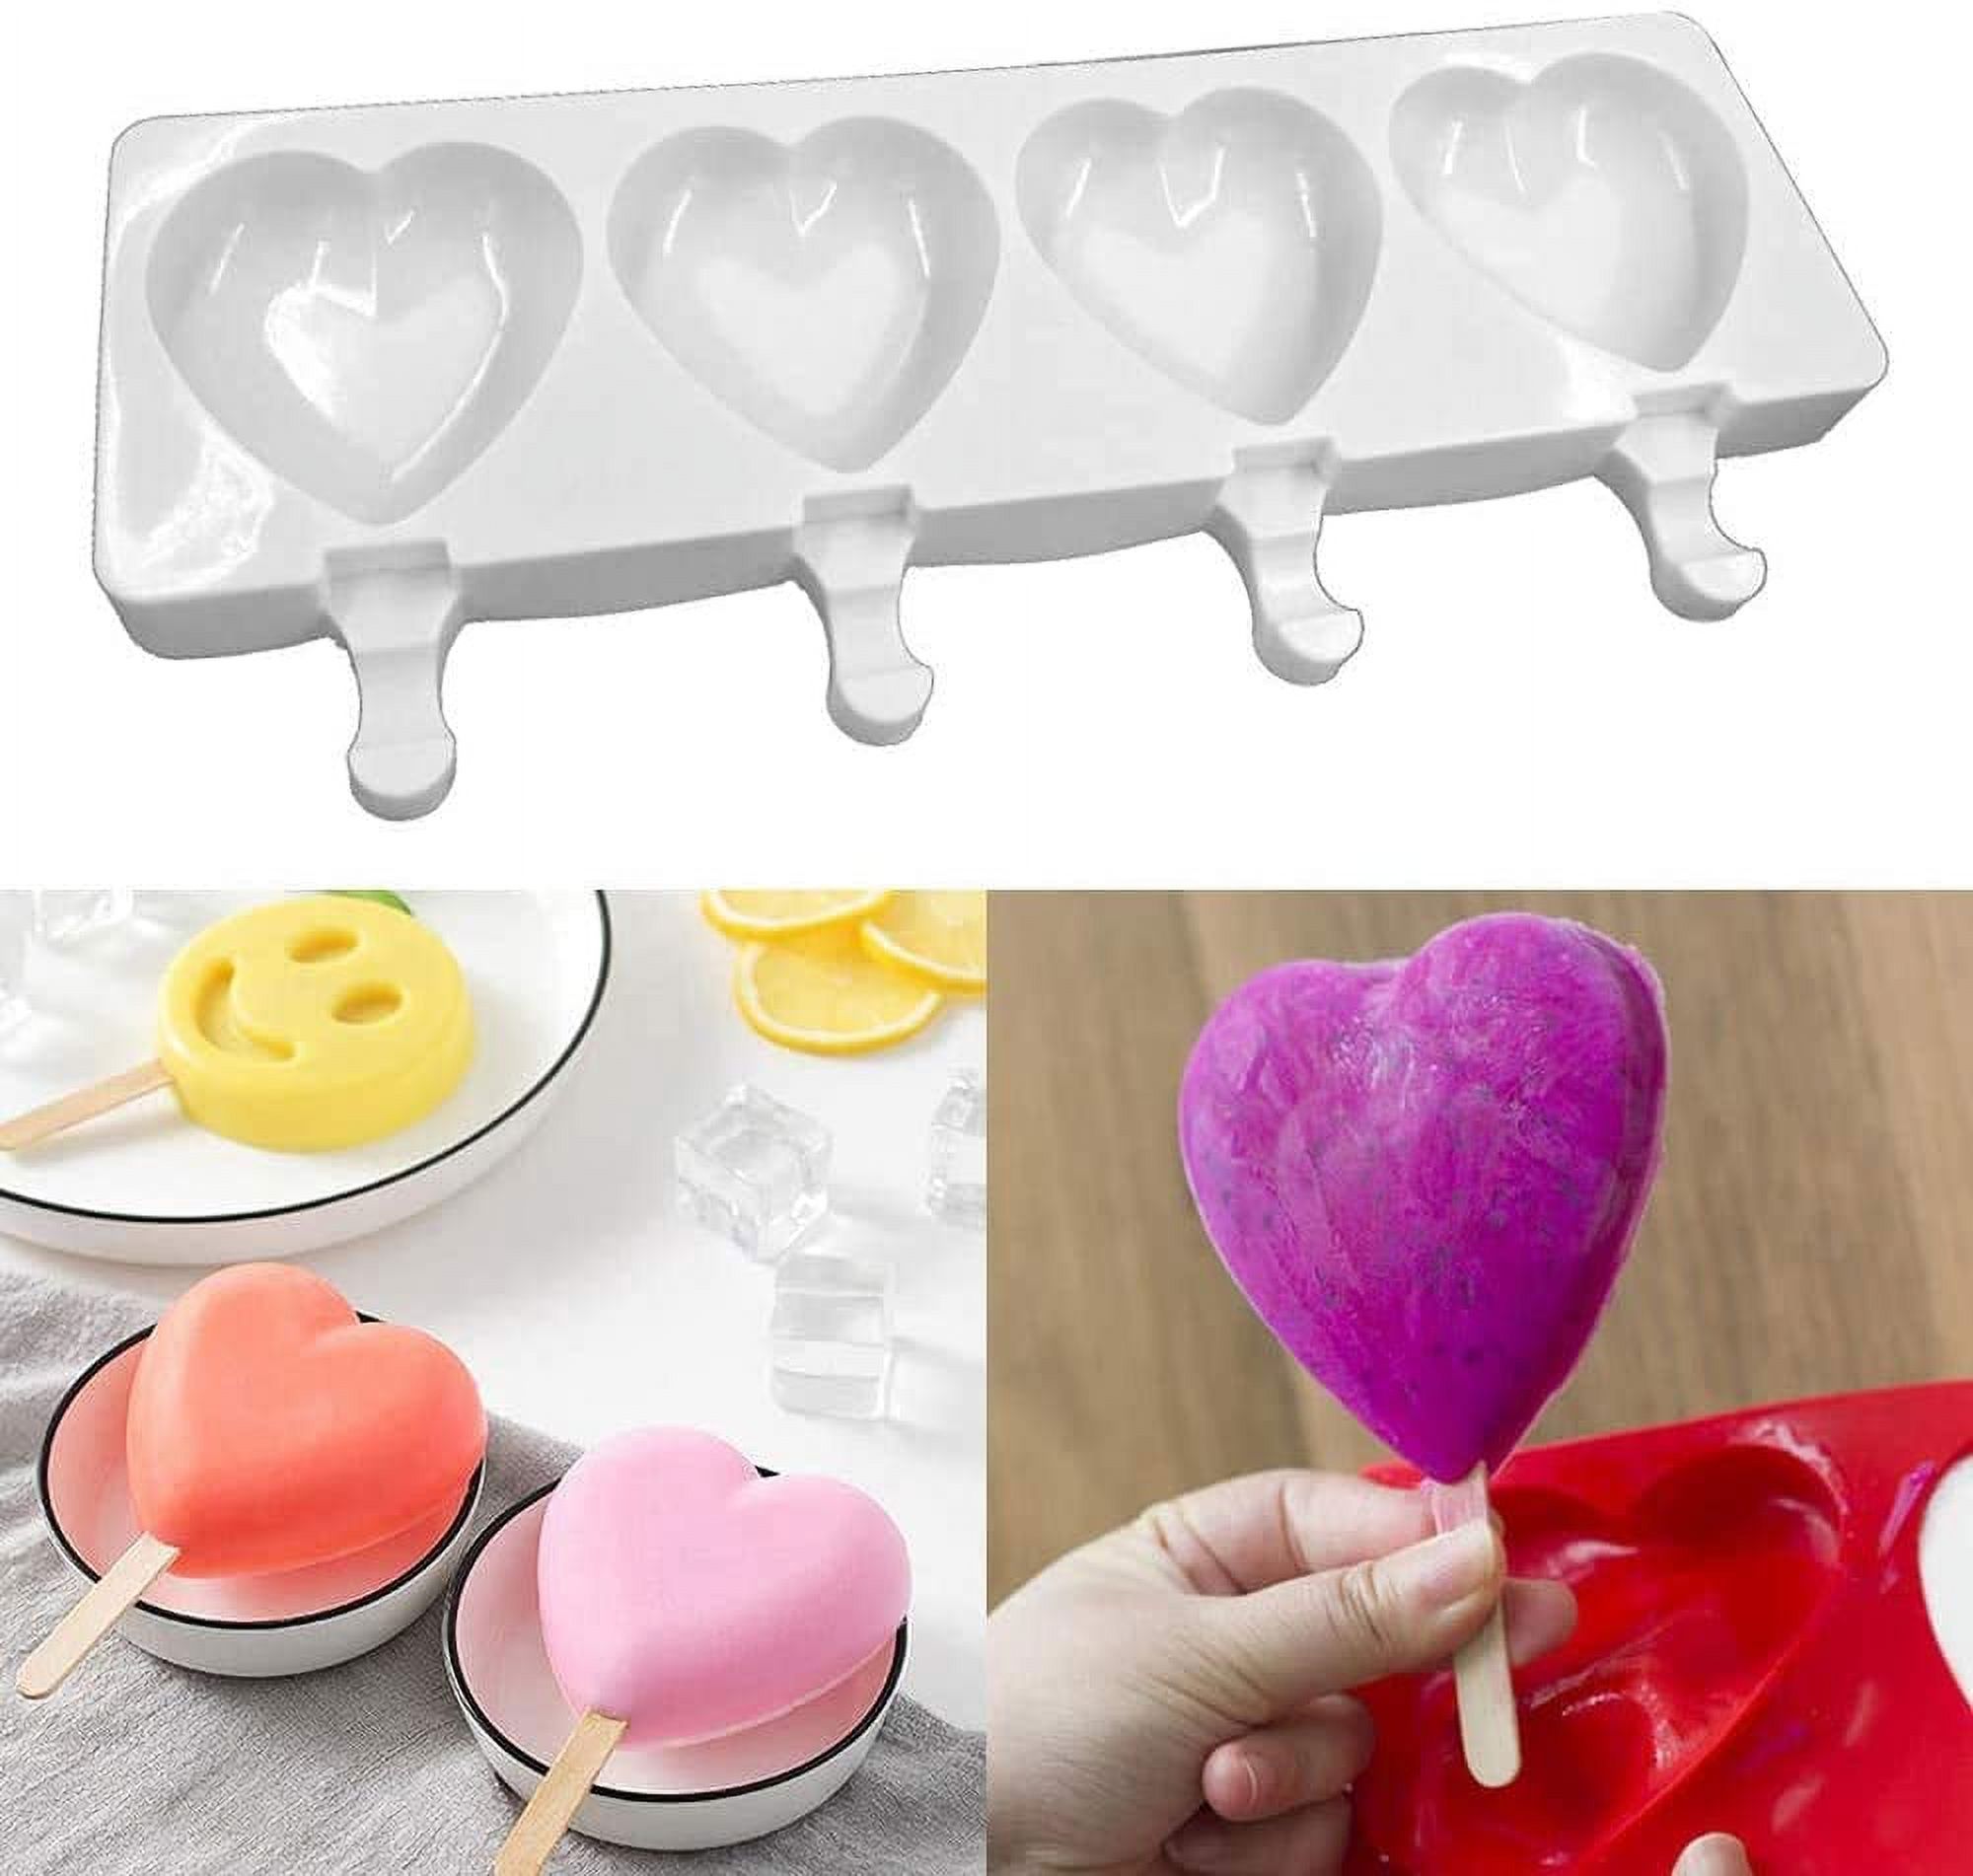 Ice Pop Molds Silicone Popsicle Molds 4 Cavities Homemade Ice Cream Mold Heart Ice Cream Mold Reusable Soft Silicone,Silicone Popsicle Molds Cake,Cakesicle Mold for DIY Ice Pops - image 5 of 7